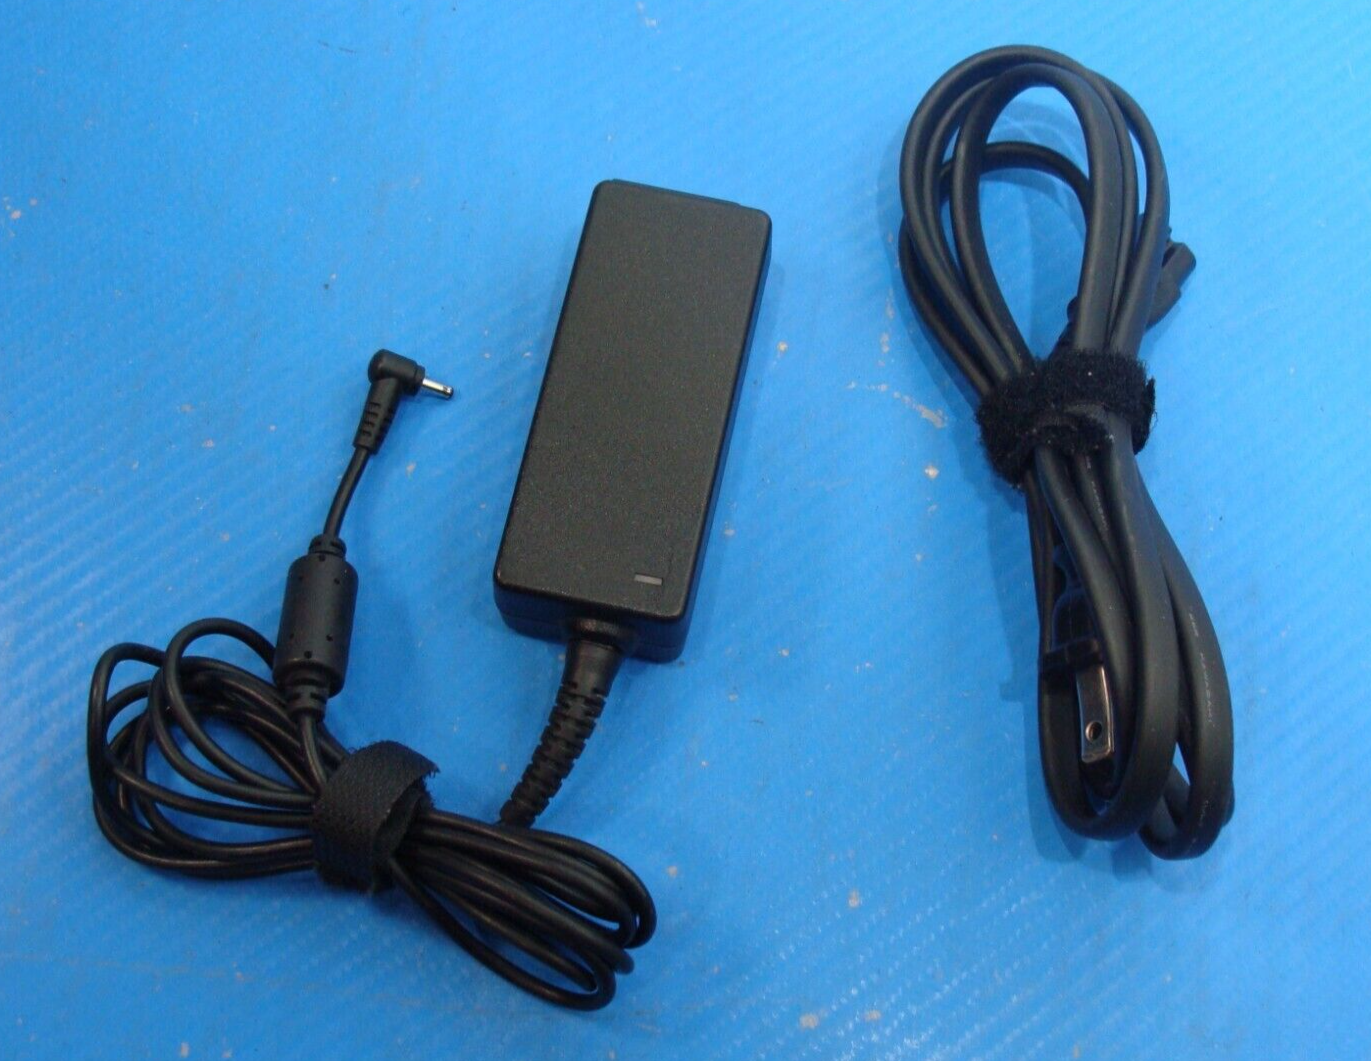 CHARGEUR ASUS MINI 19V-2.1A